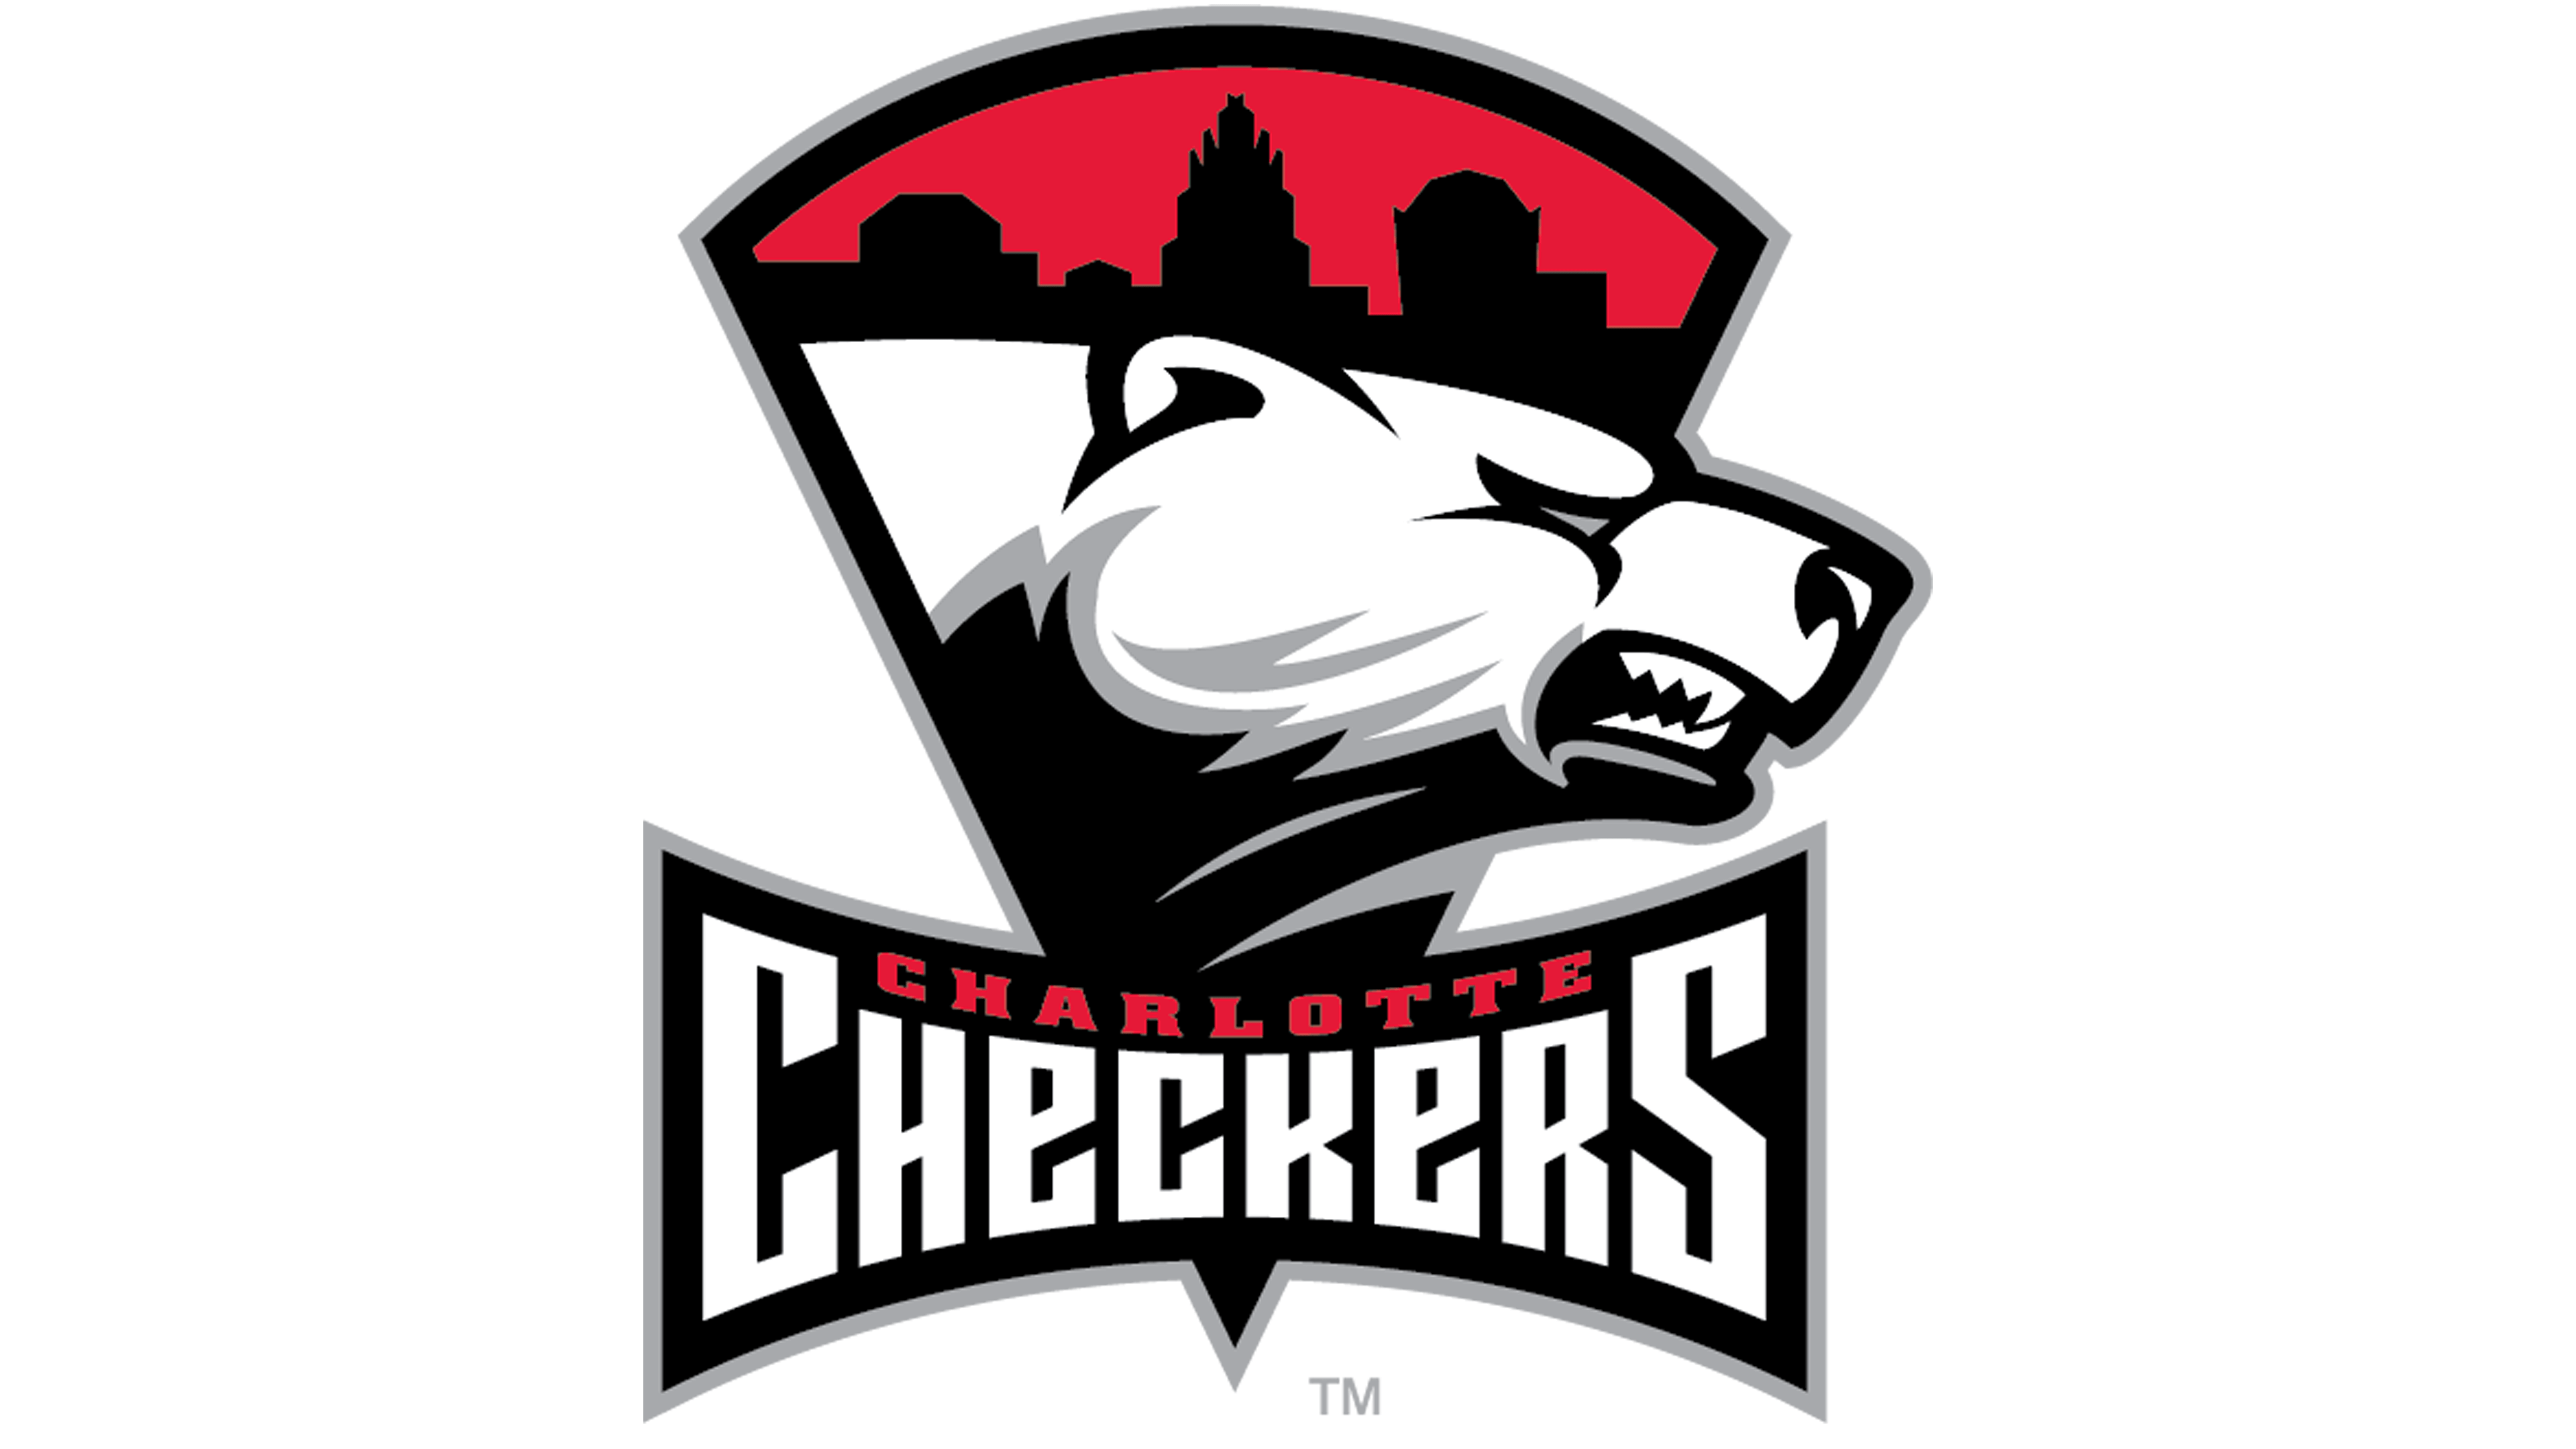 New Uniforms Unveiled - Charlotte Checkers Hockey